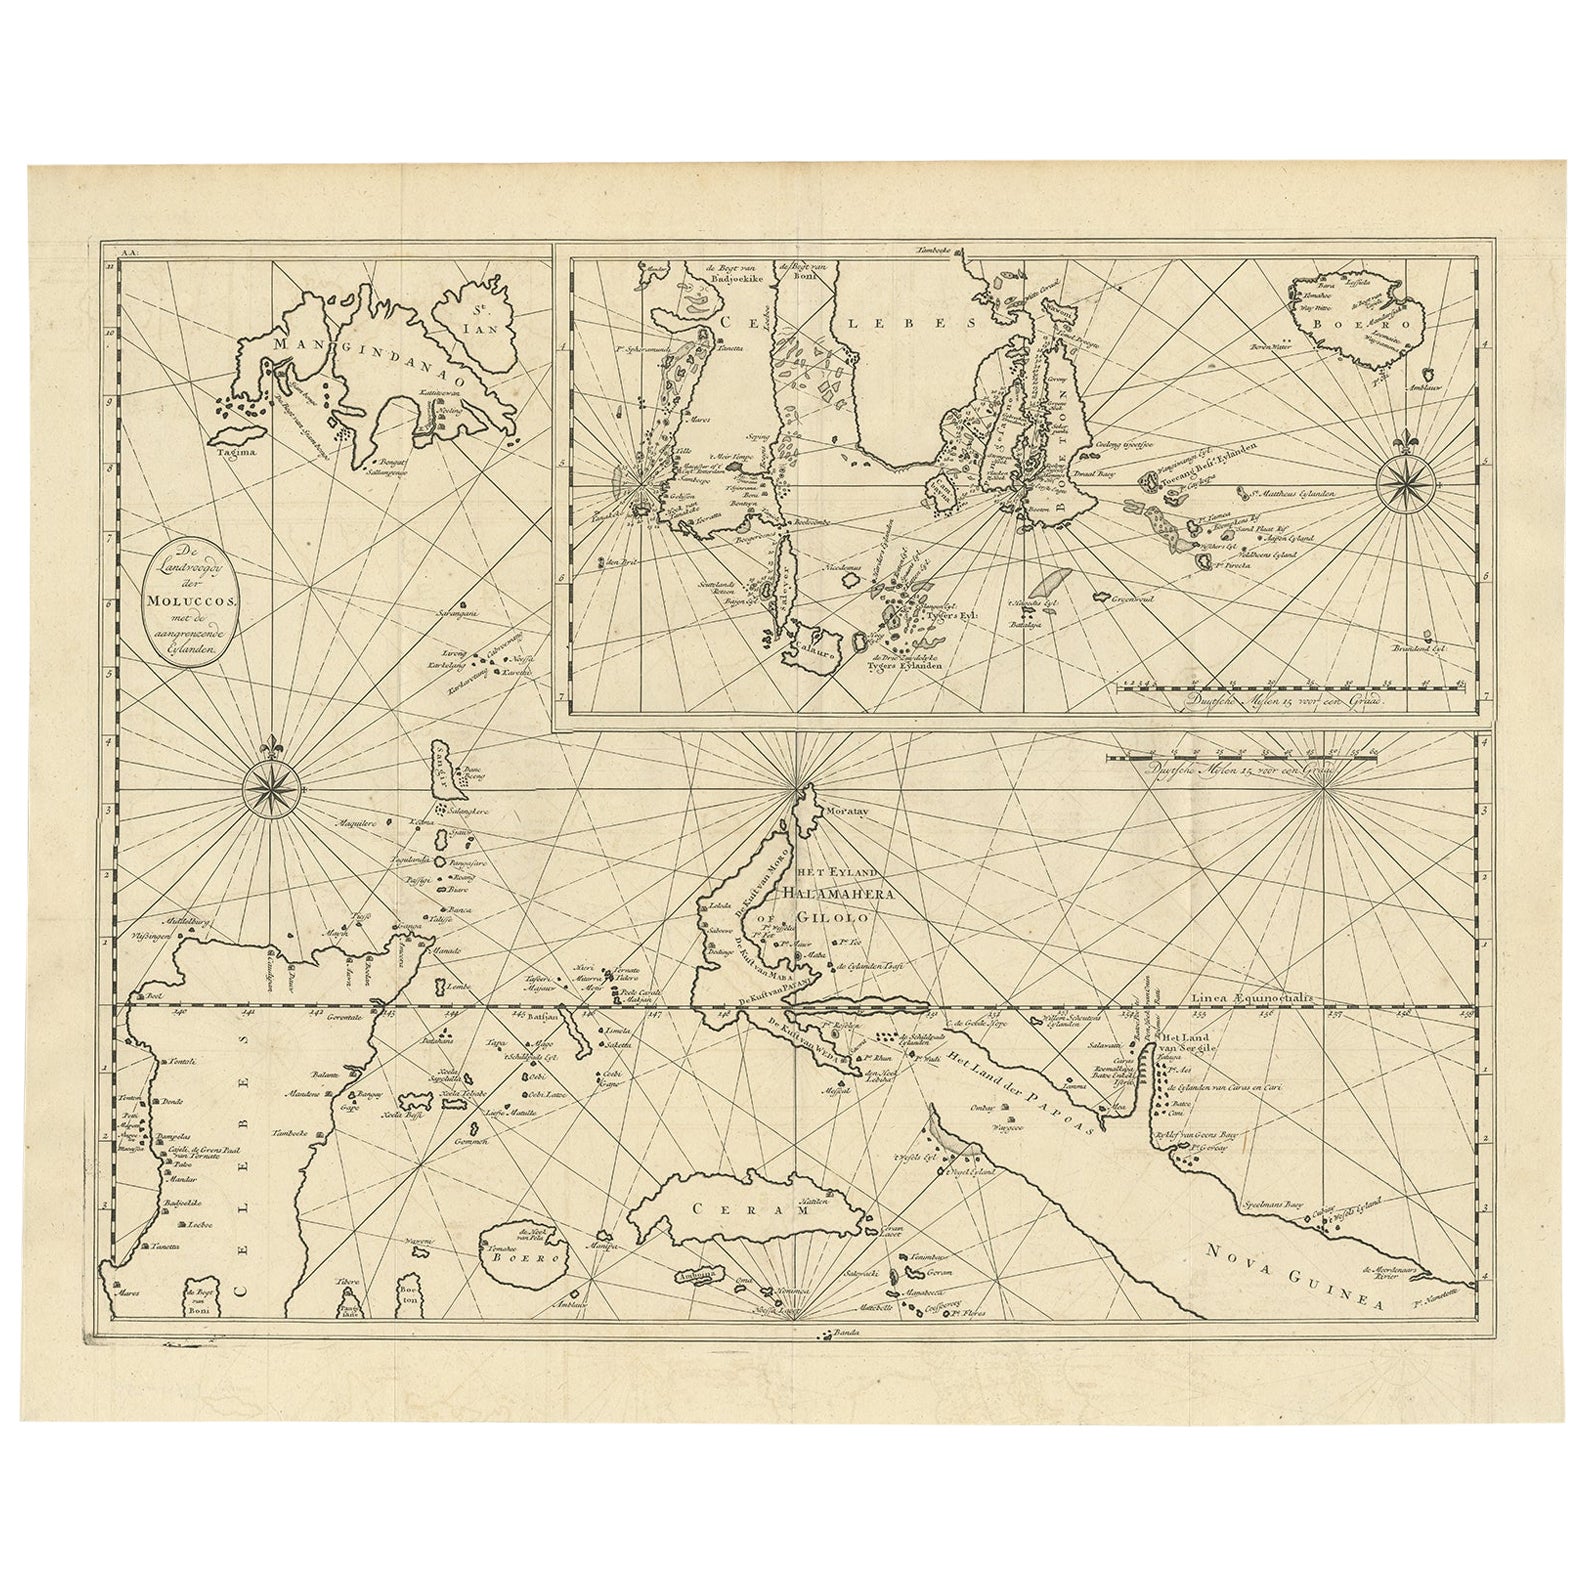 Large Antique Detailed Map of a Part of the Spice Islands, Indonesia, 1726